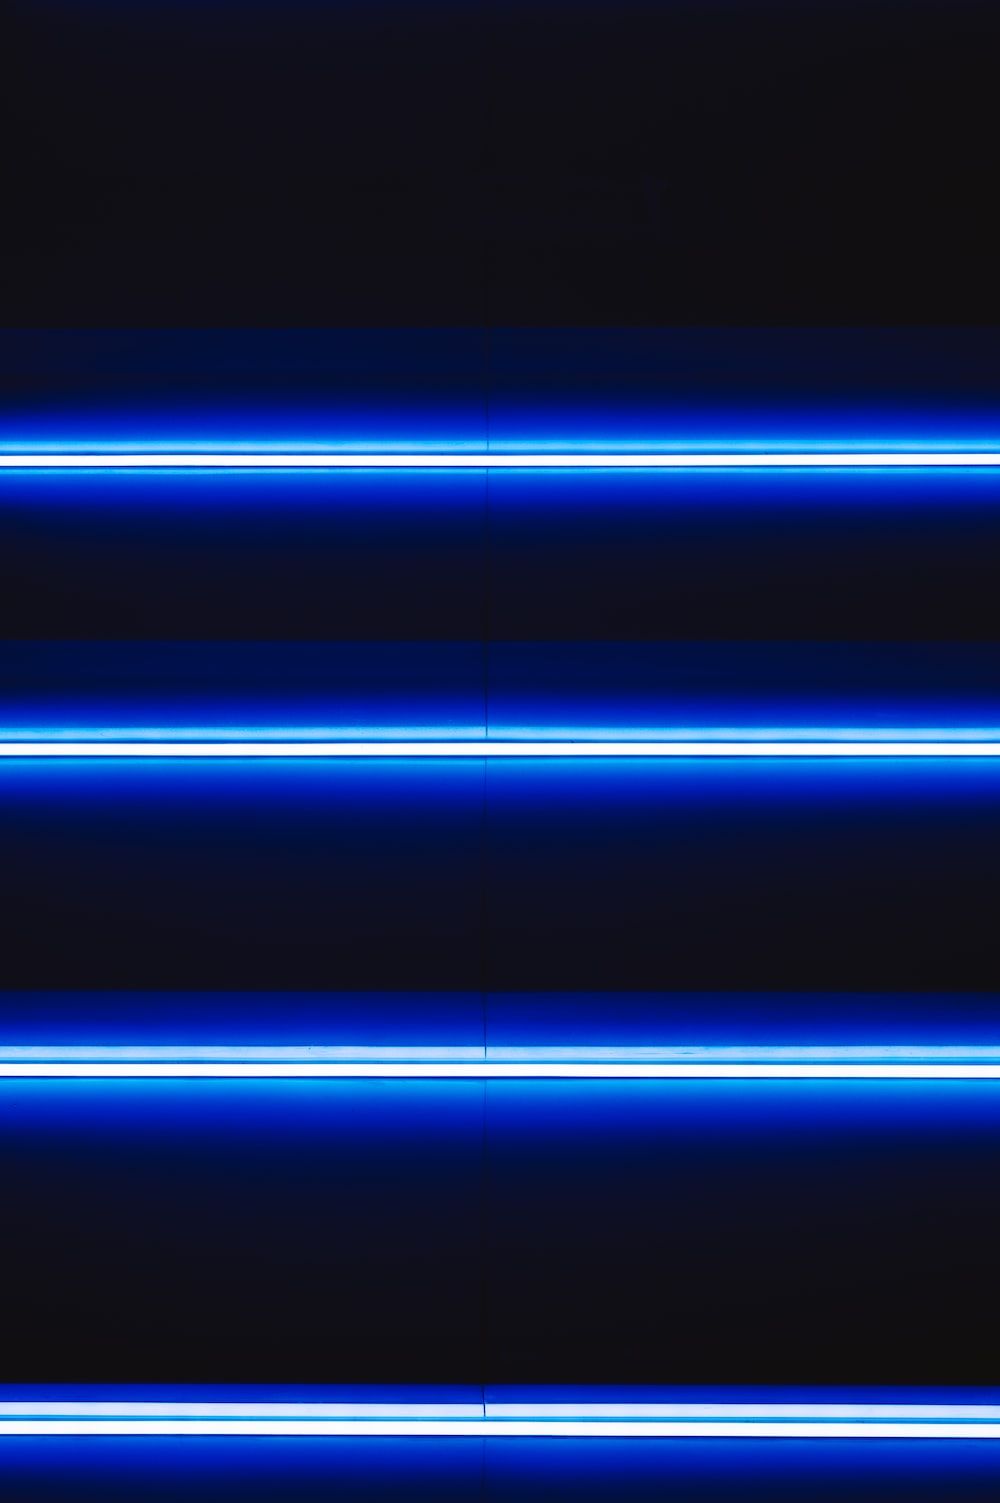 Neon Blue Picture [HD]. Download Free Image